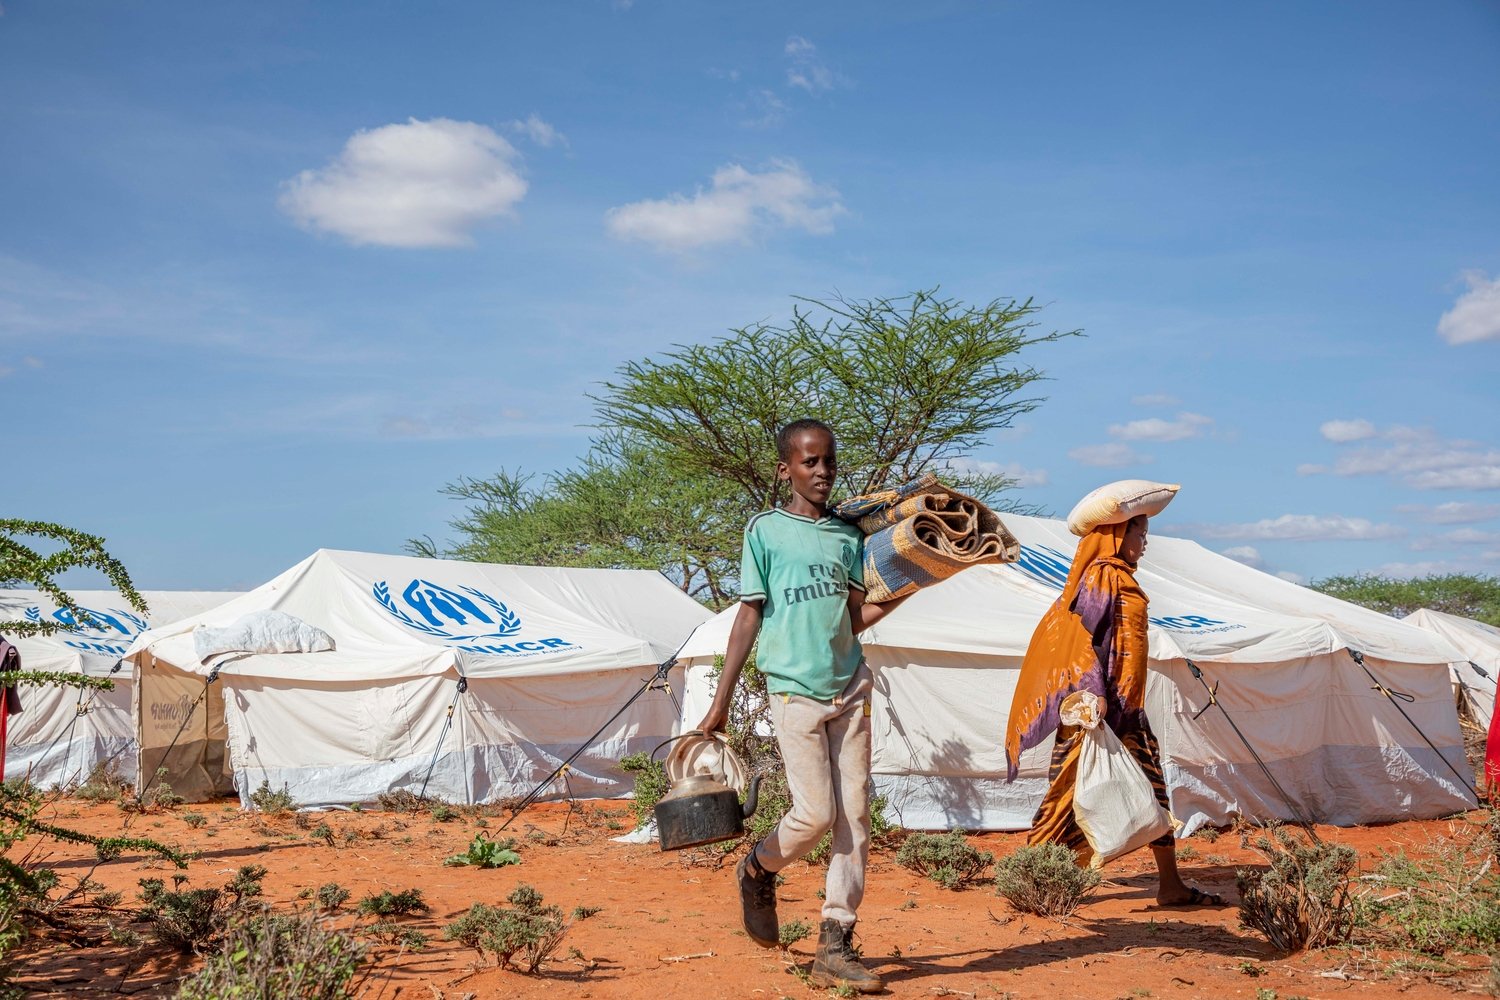 More than 1,000 Somali refugees, newly arrived in the Somali region of Ethiopia, were relocated from border areas to a new settlement in new Mirqaan in early April.